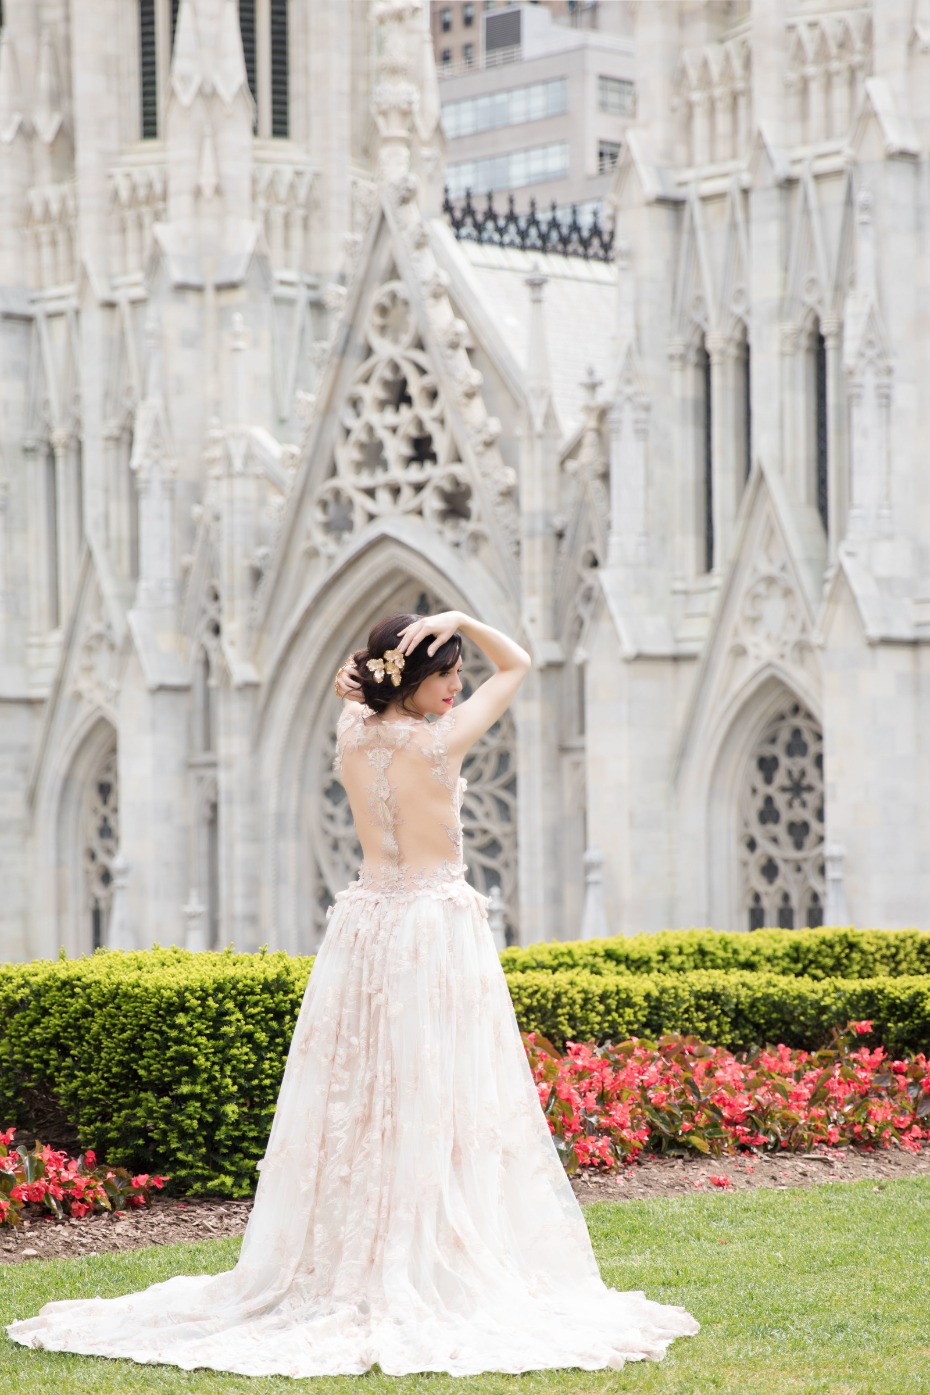 The back of this Galia Lahav gown is to die for